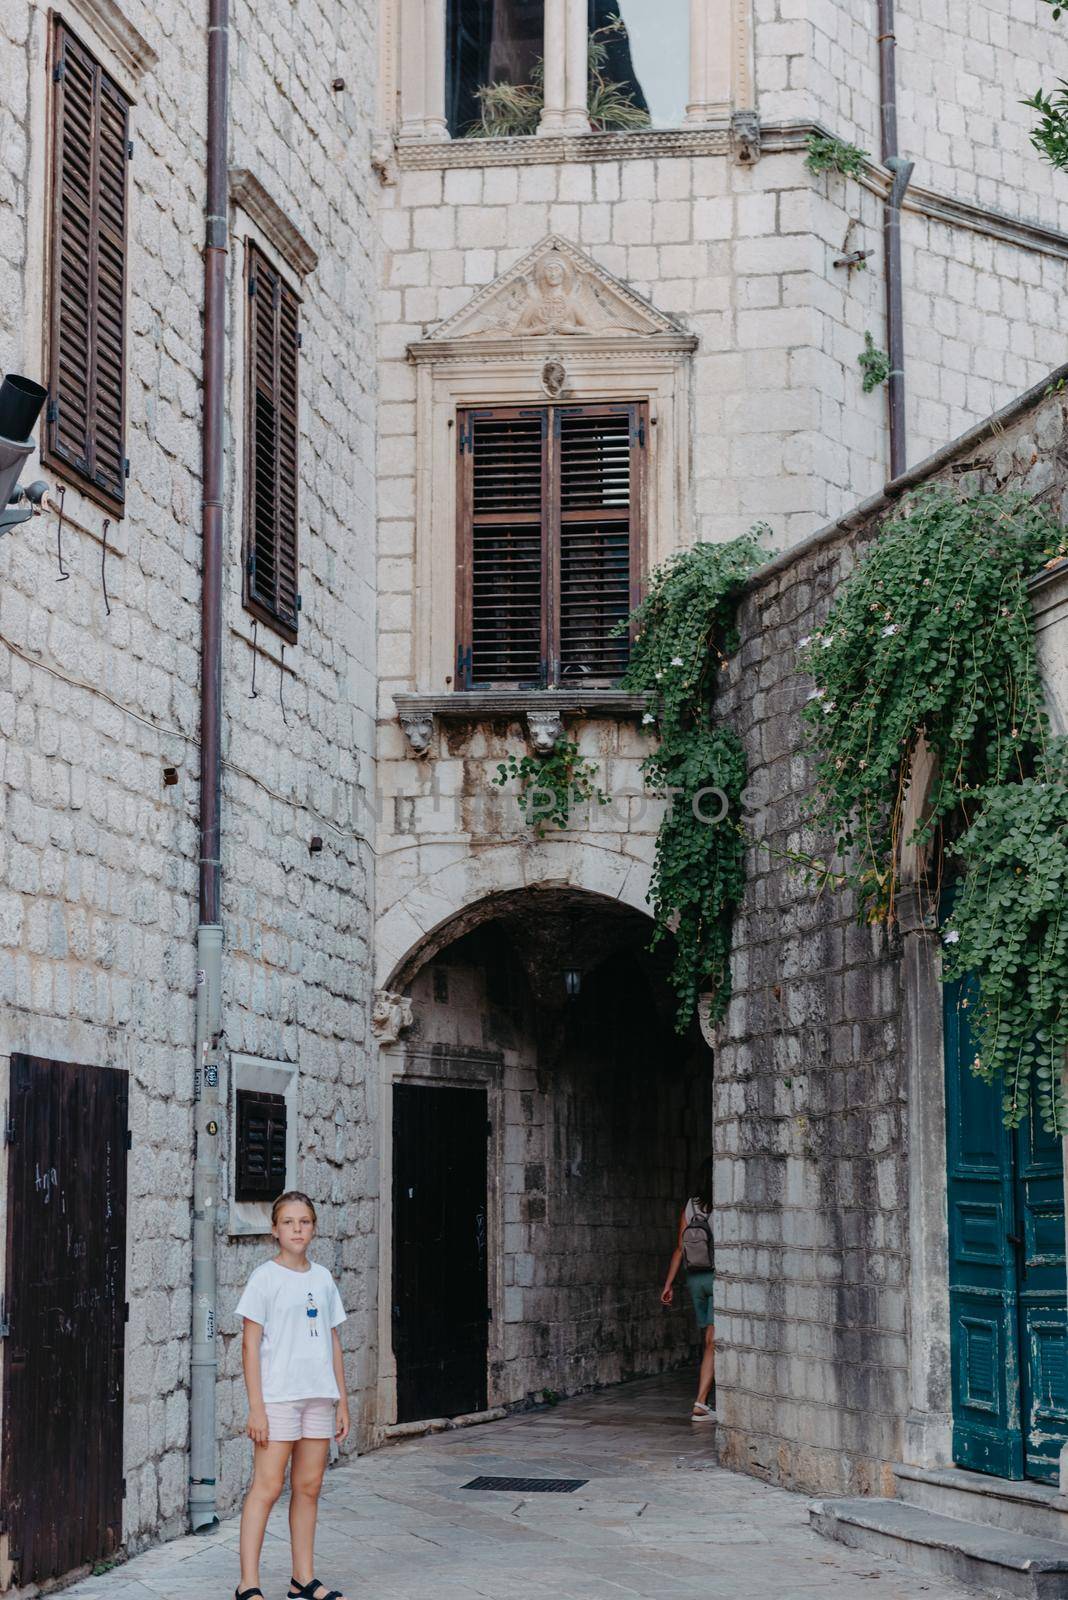 Girl Tourist Walking Through Ancient Narrow Street On A Beautiful Summer Day In MEDITERRANEAN MEDIEVAL CITY, OLD TOWN KOTOR, MONTENEGRO. Young Beautiful Cheerful Woman Walking On Old Street. Europe.